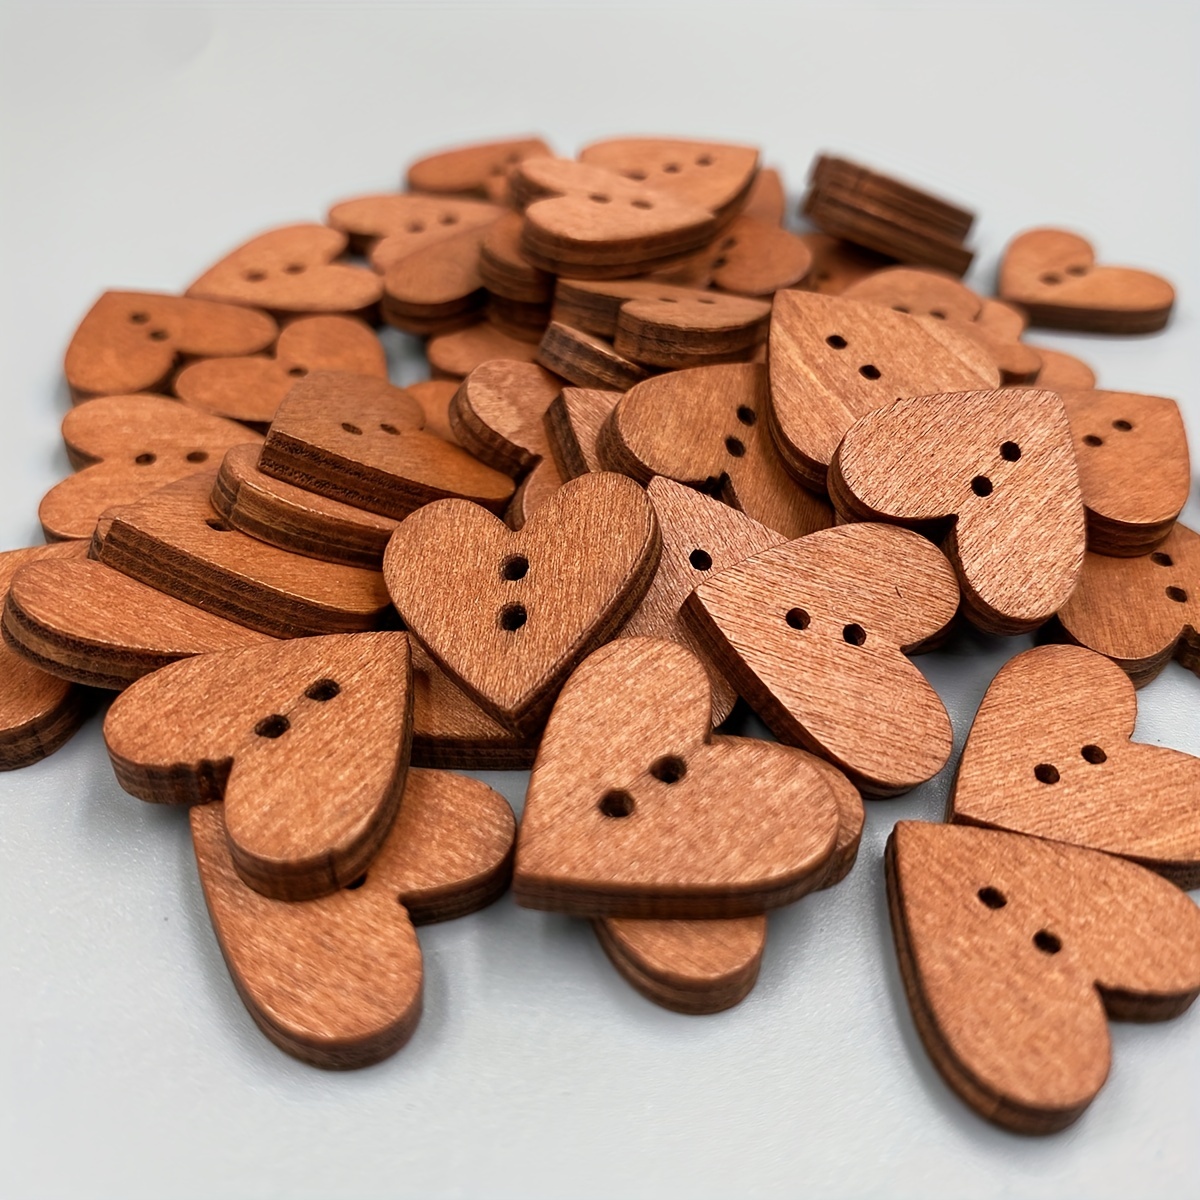 Wepetyo 400 Pcs Wooden Buttons,Many Styles Decorative Sewing Button,Buttons for Crafts,2 Holes Round Decorative Painted Wood Buttons,Cute Buttons,3D